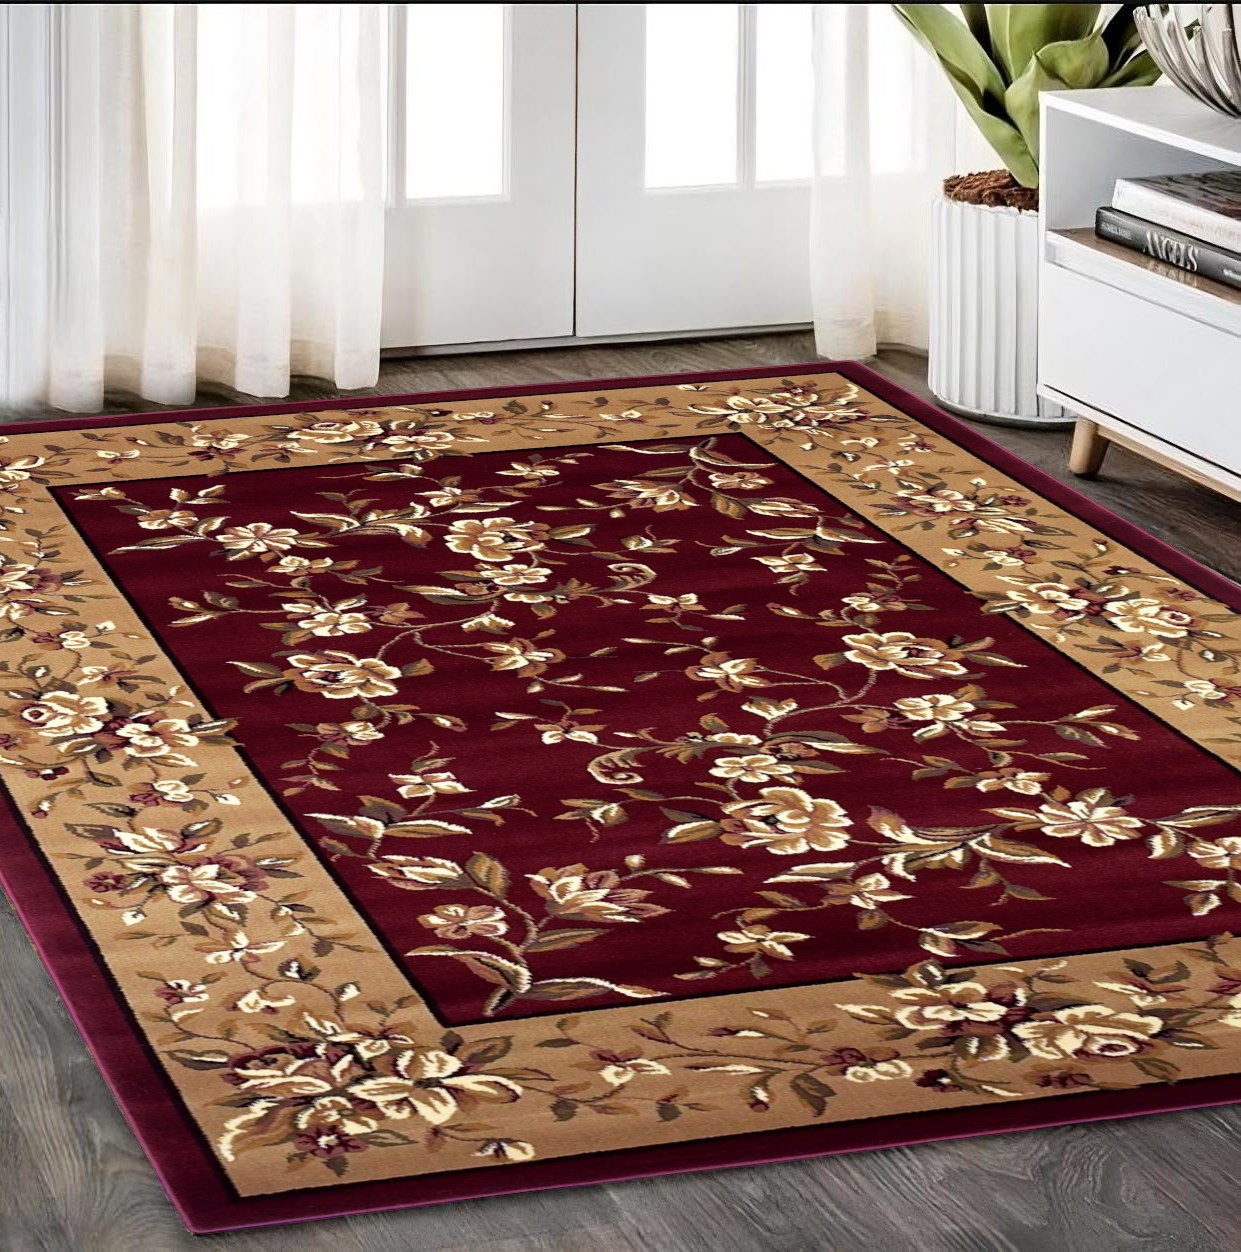 5' X 8' Red Or Beige Floral Bordered Area Rug-352430-1